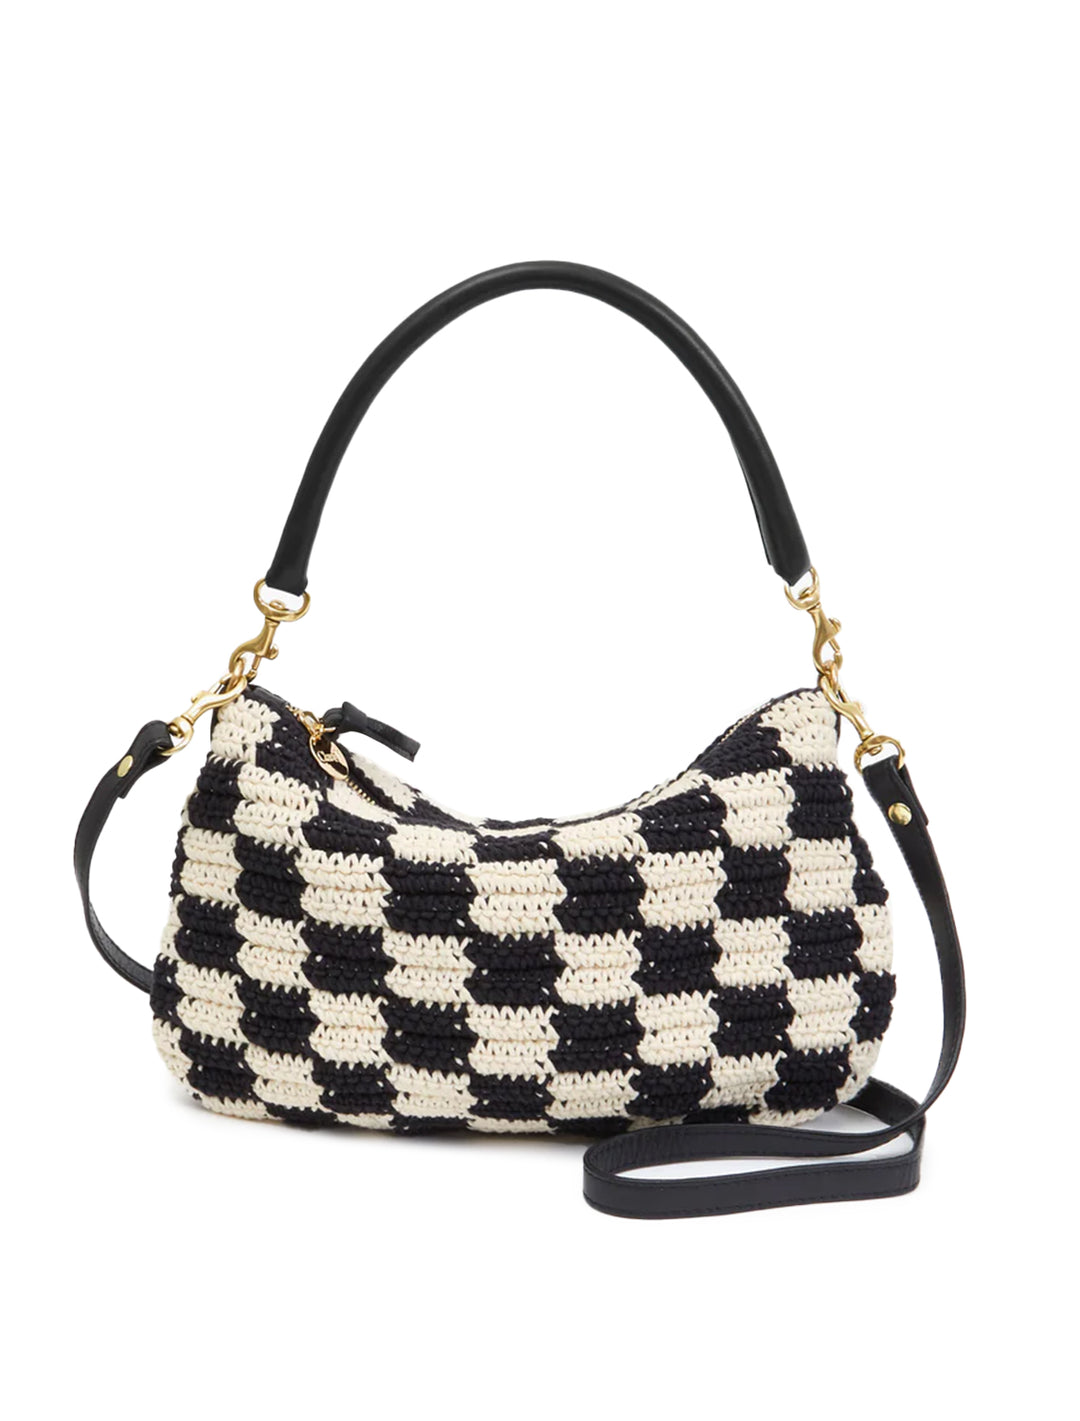 Front view of Clare V.'s petit moyen messenger in black and cream crochet checker.